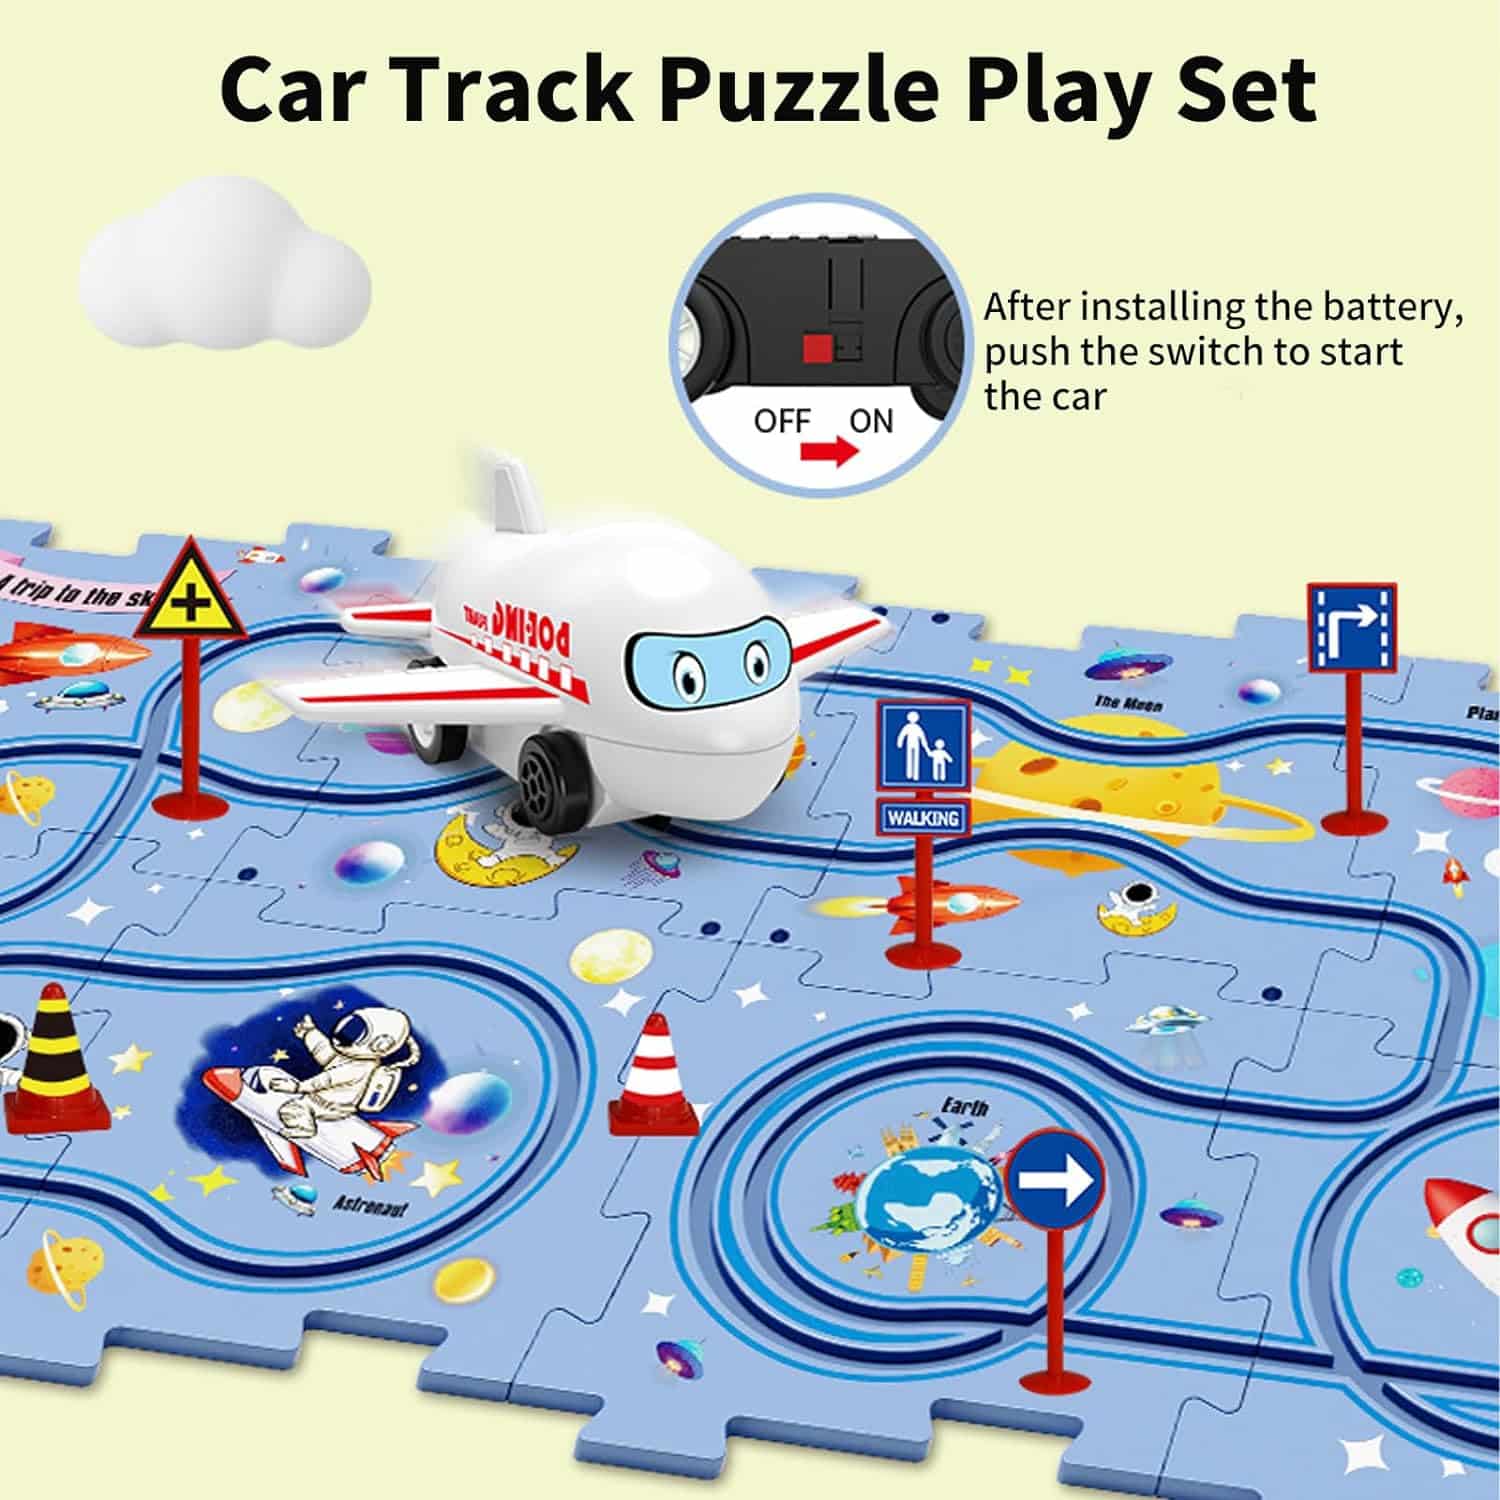 Children's Educational Puzzle Track Car Play Set - A Fun and Stimulating Toy for Kids